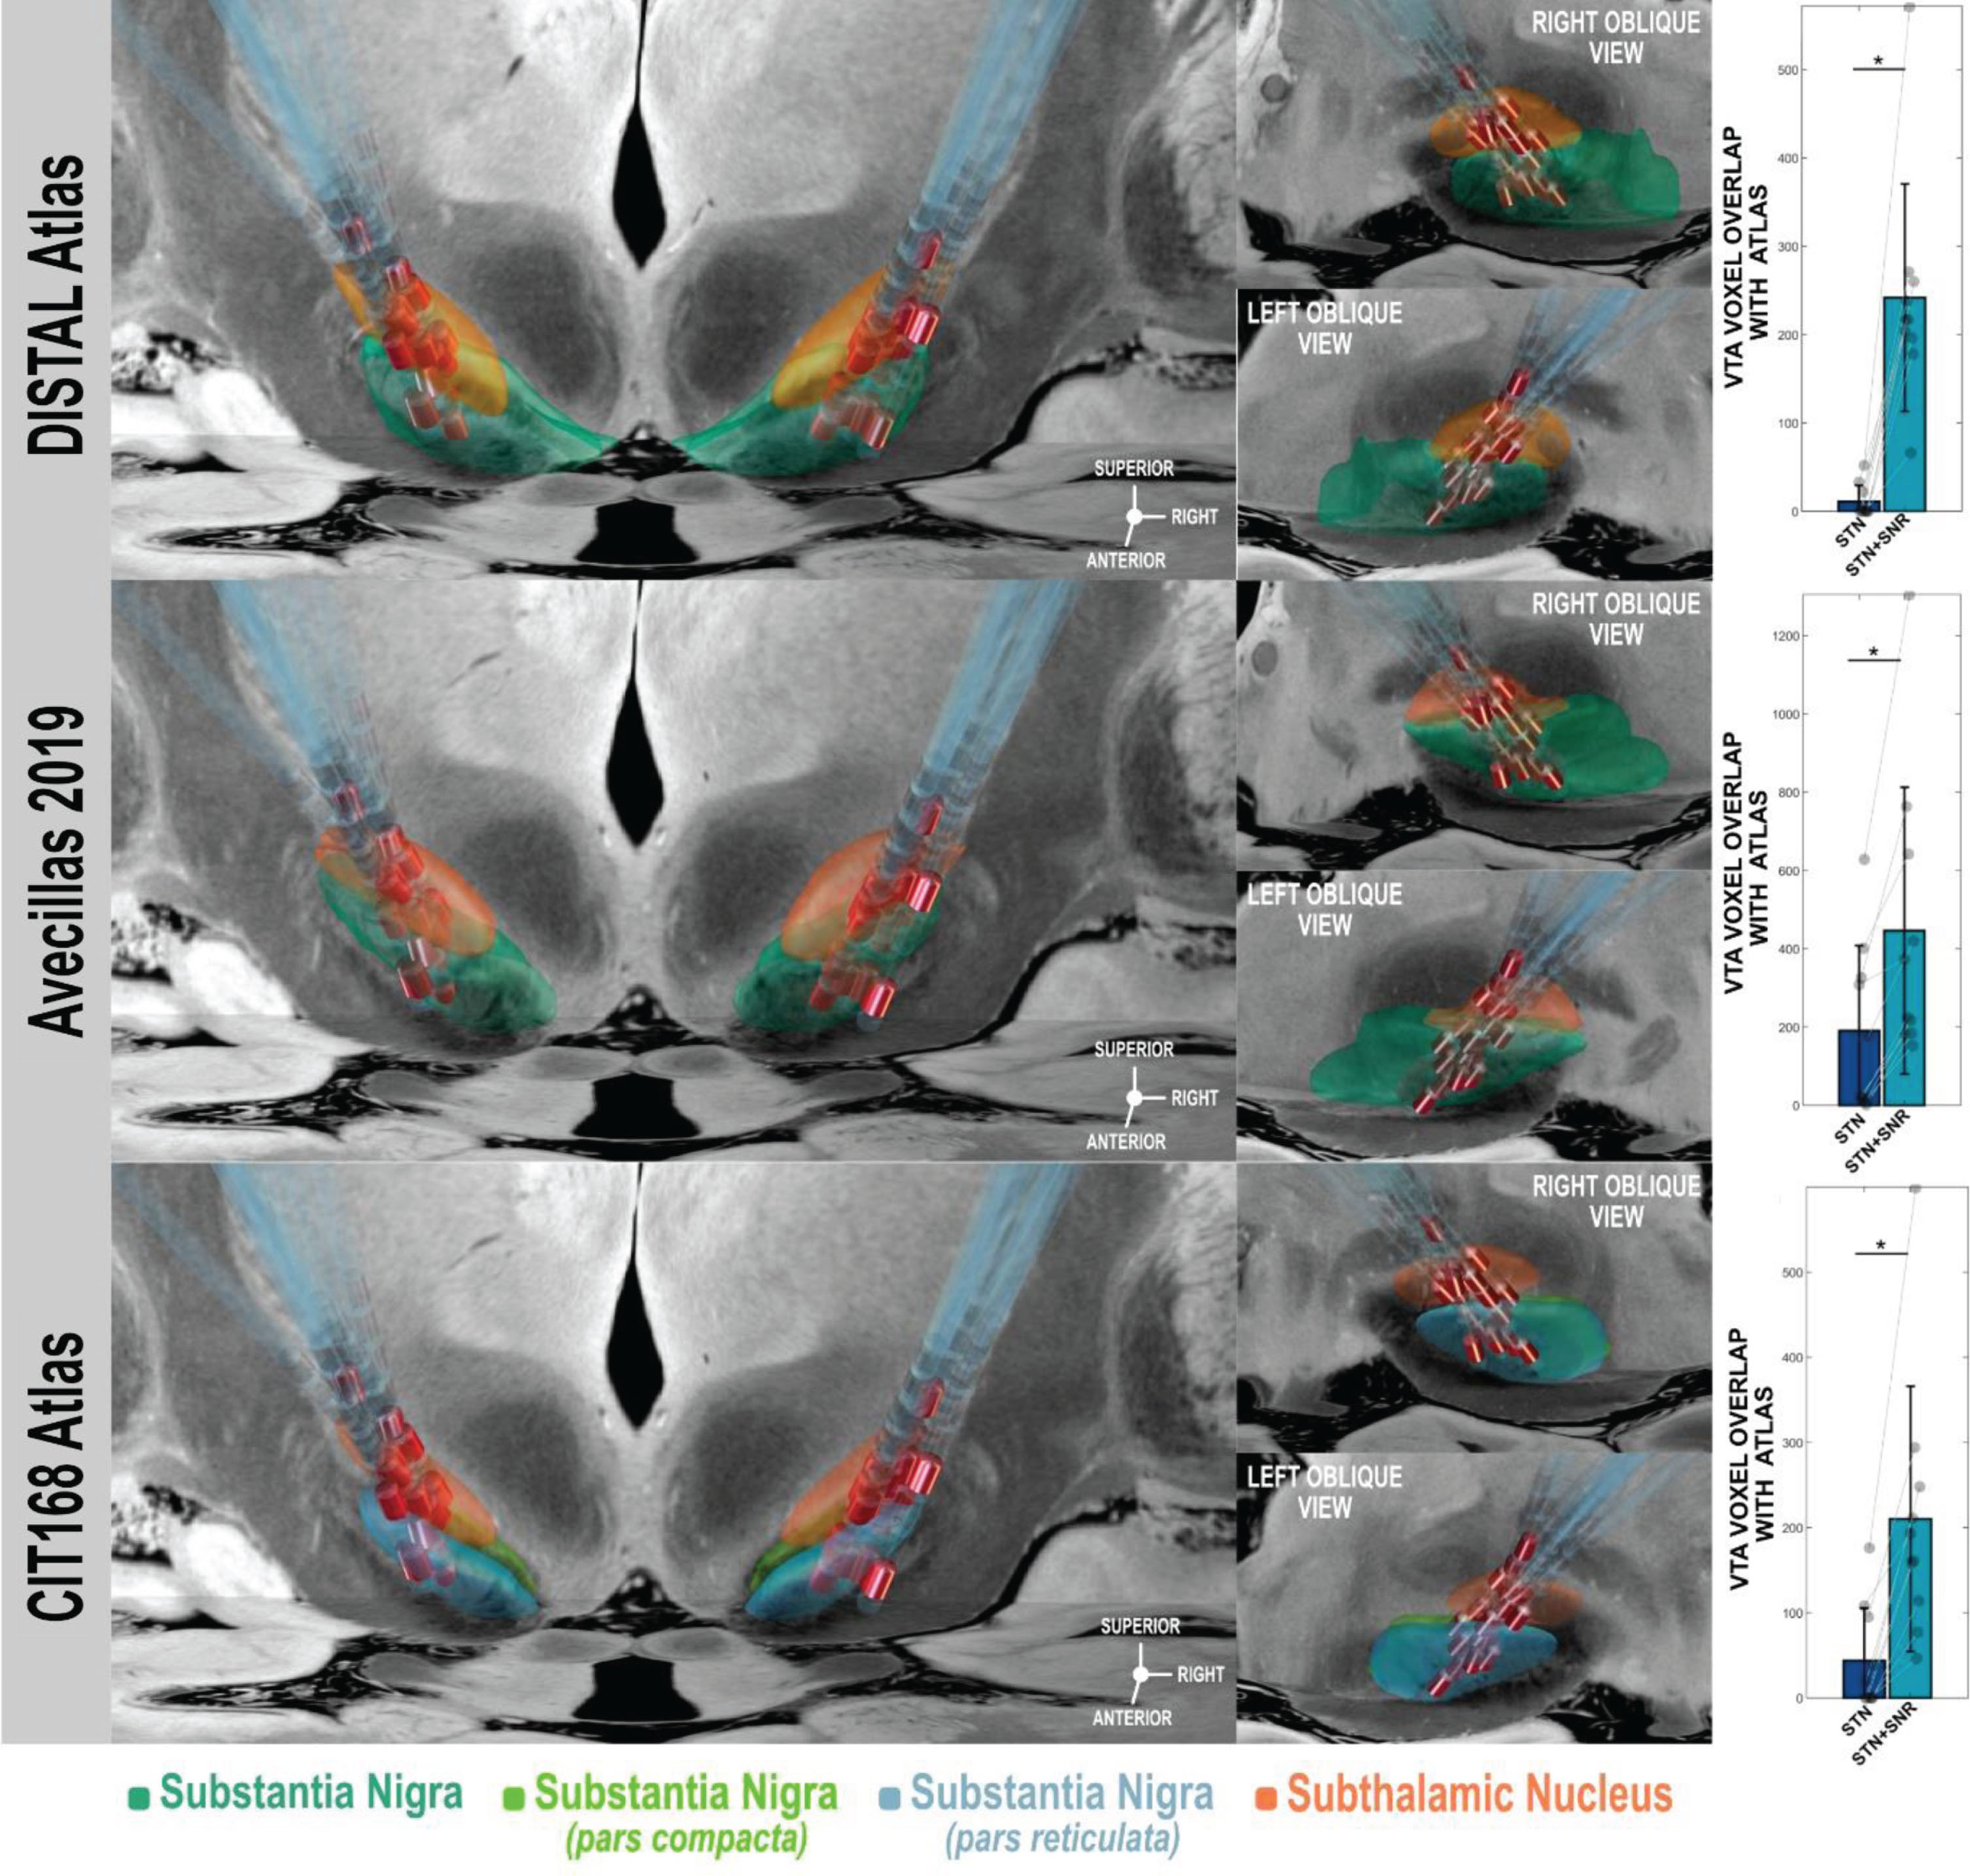 Left Panel: 3D-visualization of DBS leads of the cohort in coronal view (left) and sagittal views on right and left STN (orange) and SN (turquoise) relative to target structures as represented by DISTAL Atlas [32], Avecillas atlas [34], and CIT168 atlas [35]. Contacts active in the STN+SNr-DBS condition are highlighted in red. Note the position of the most ventral active contacts within or in direct vicinity of the SNr atlas representations. Atlas structures and leads are superimposed on a slice of 7 Tesla MRI of ex vivo human brain at 200 micron resolution [61]. Right Panel: Bar charts showing numerical overlap of voxels of stimulation volumes for stimulation conditions STN and STN+SNr-DBS with corresponding atlas representation of substantia nigra of DISTAL Atlas [32], Avecillas atlas [34], and CIT168 atlas [35]. Voxel numbers account for both hemispheres. * indicates differences of overlapping voxels were significant (p < 0.05).